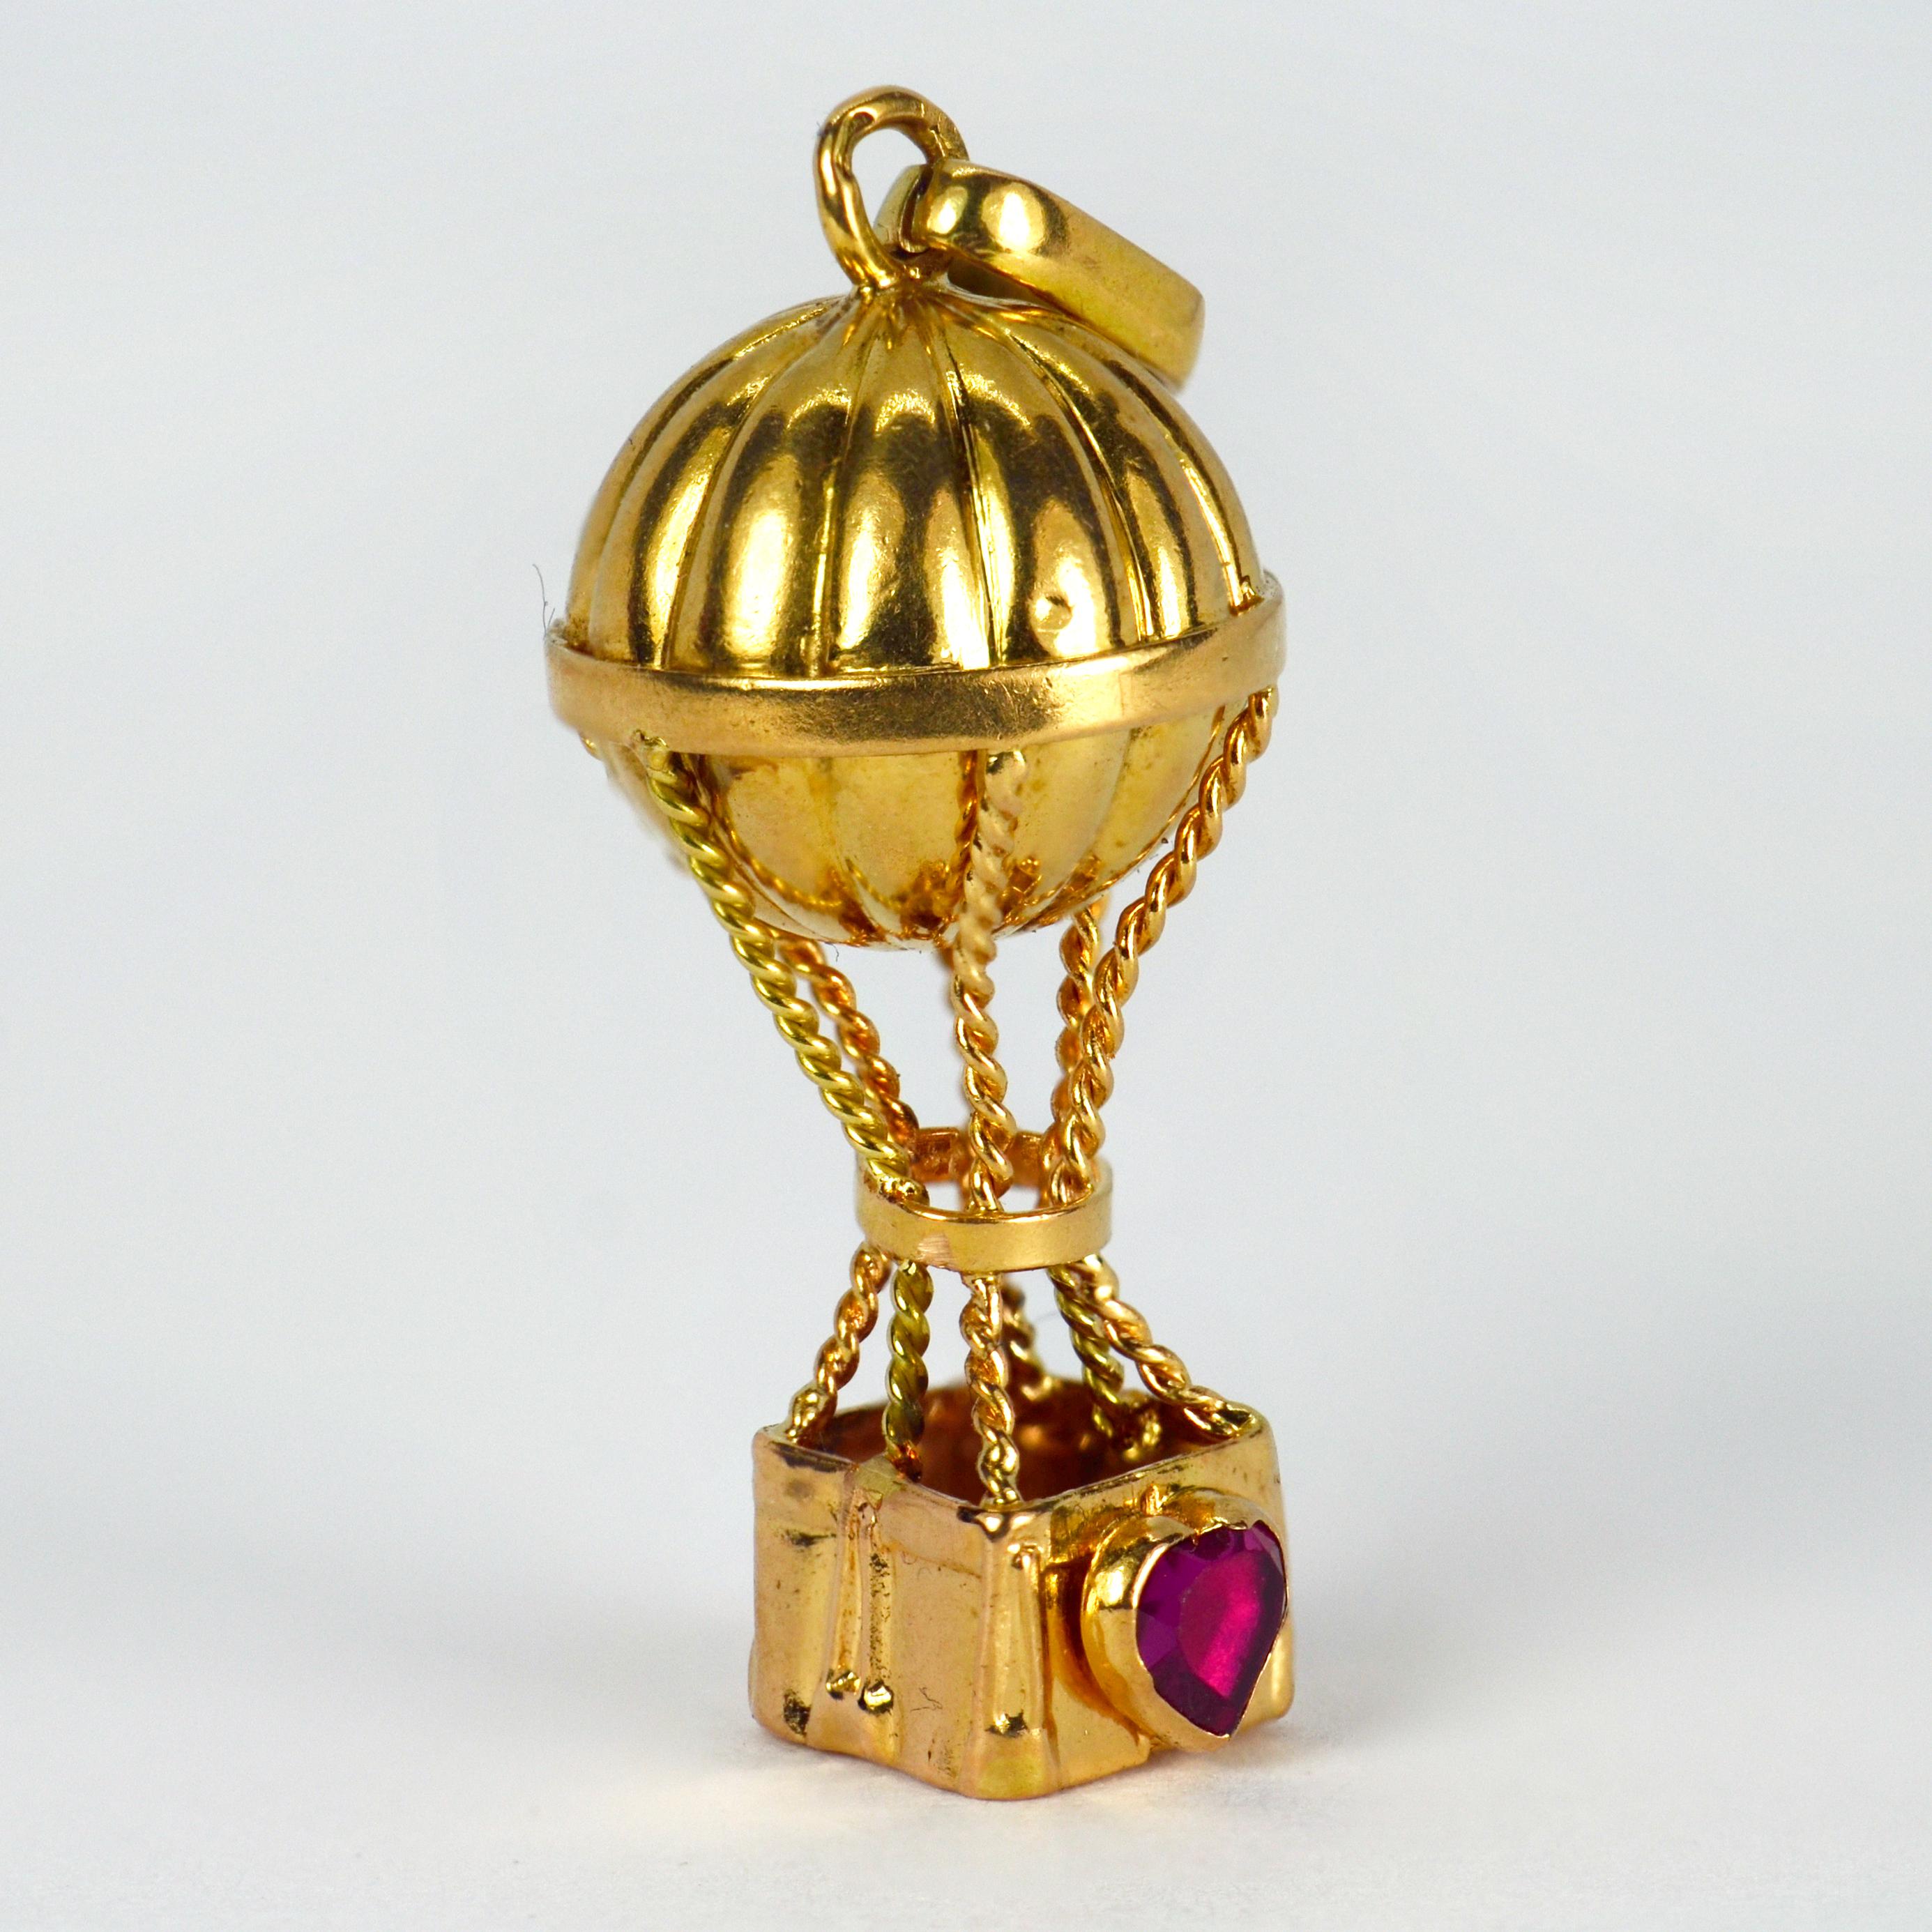 An 18 karat (18K) yellow gold charm pendant designed as a hot air balloon with a red ruby love heart to one side of the basket. Stamped with the French import marks for 18 karat gold.

Dimensions: 2.8 x 1.3 x 1.3 cm (not including jump ring)
Weight: